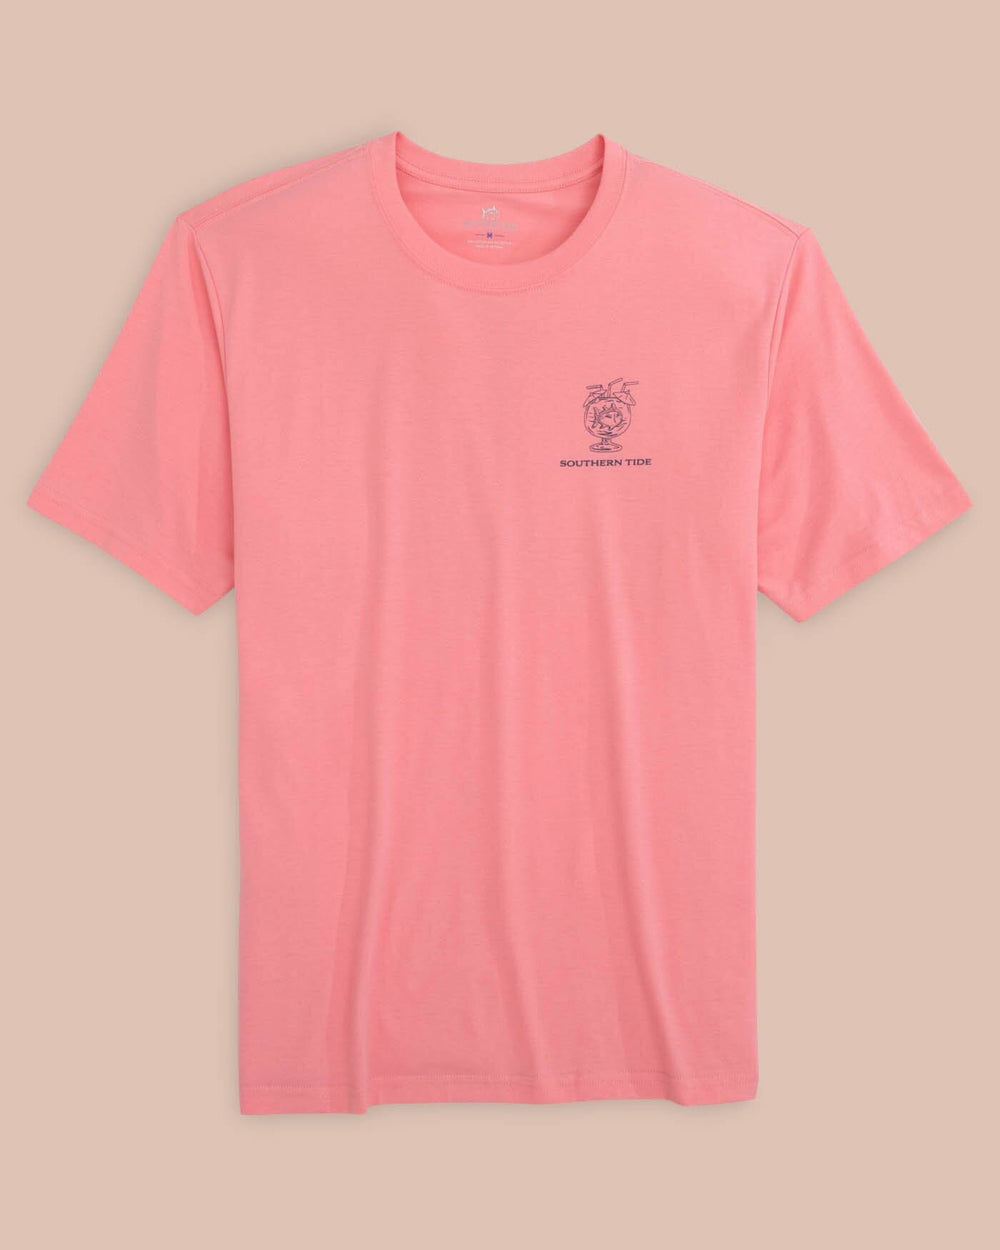 The front view of the Southern Tide Pink Punch Short Sleeve T-Shirt by Southern Tide - Geranium Pink